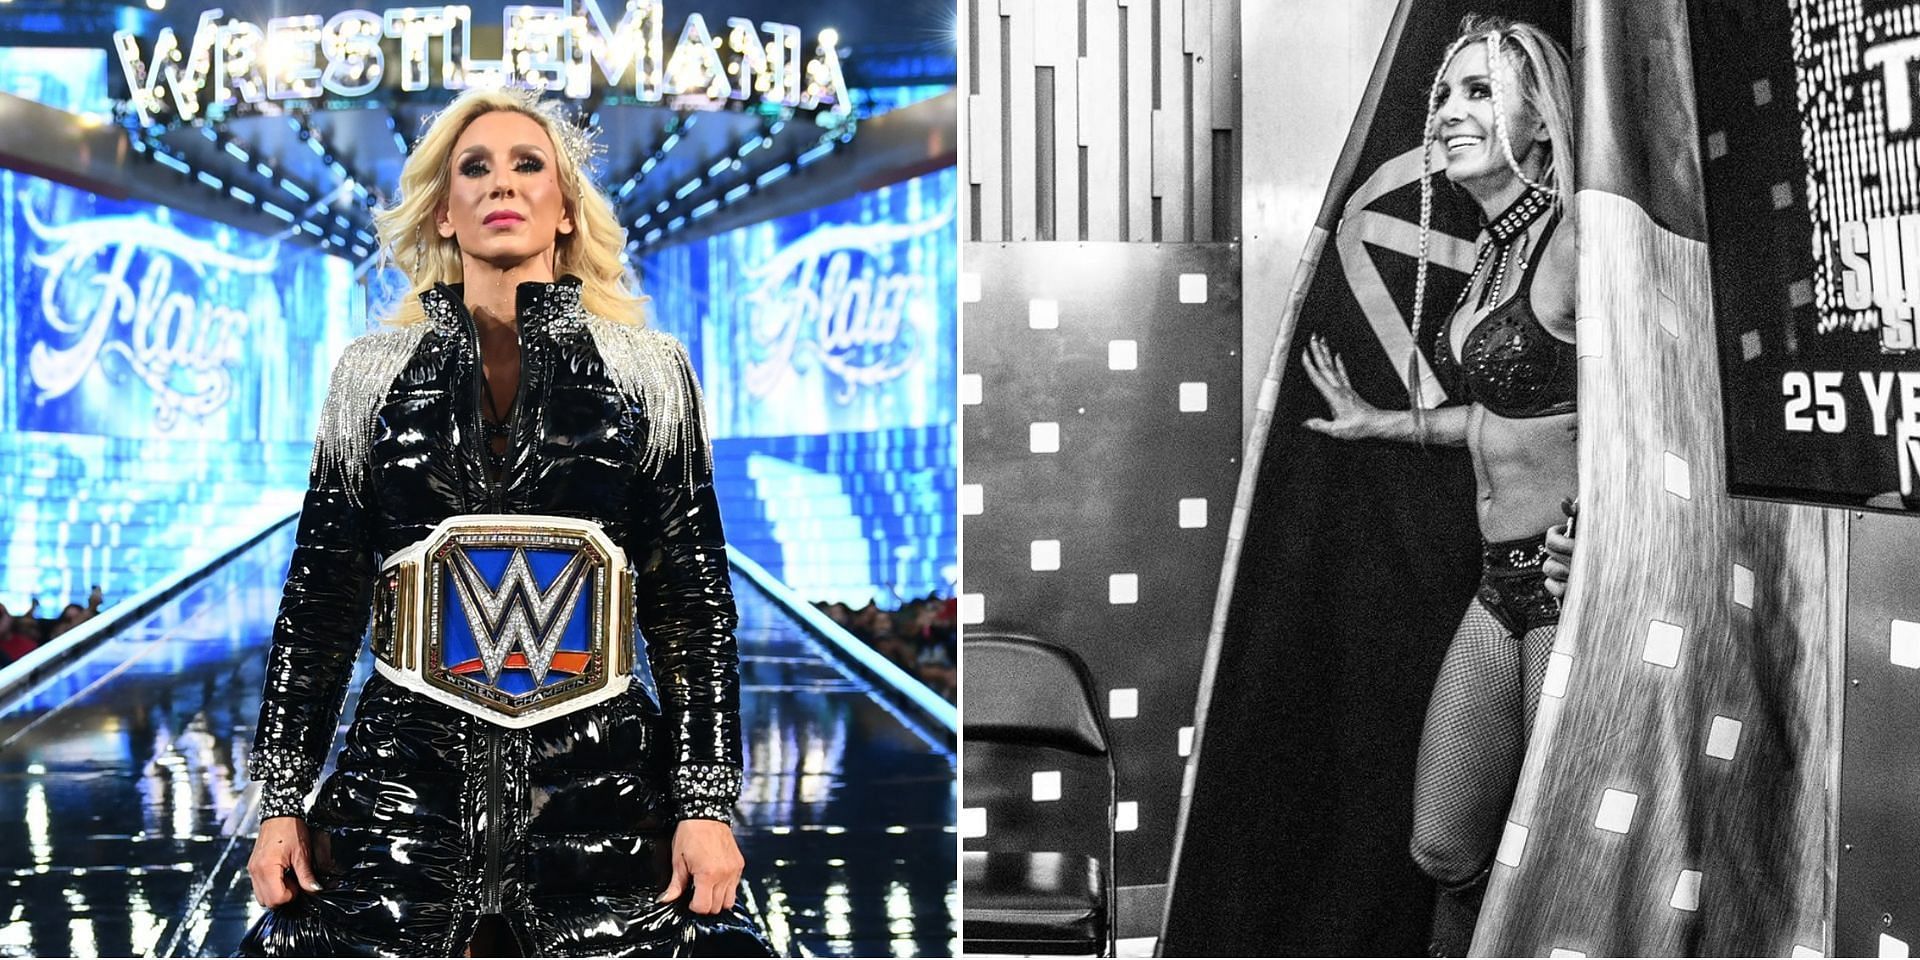 Charlotte Flair competed at WrestleMania 39